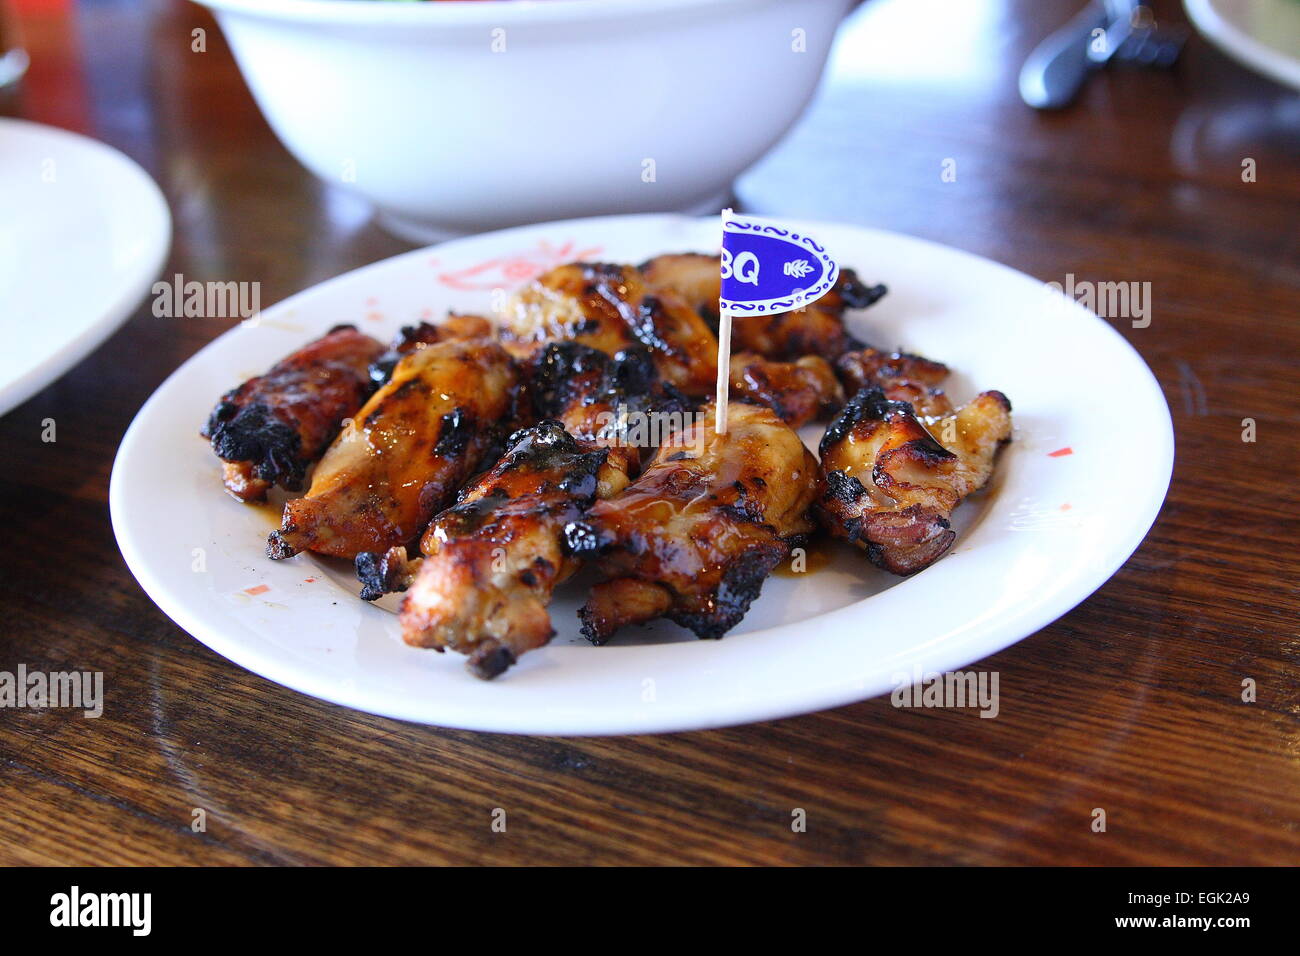 Nandos Chicken pieces on a plate Stock Photo